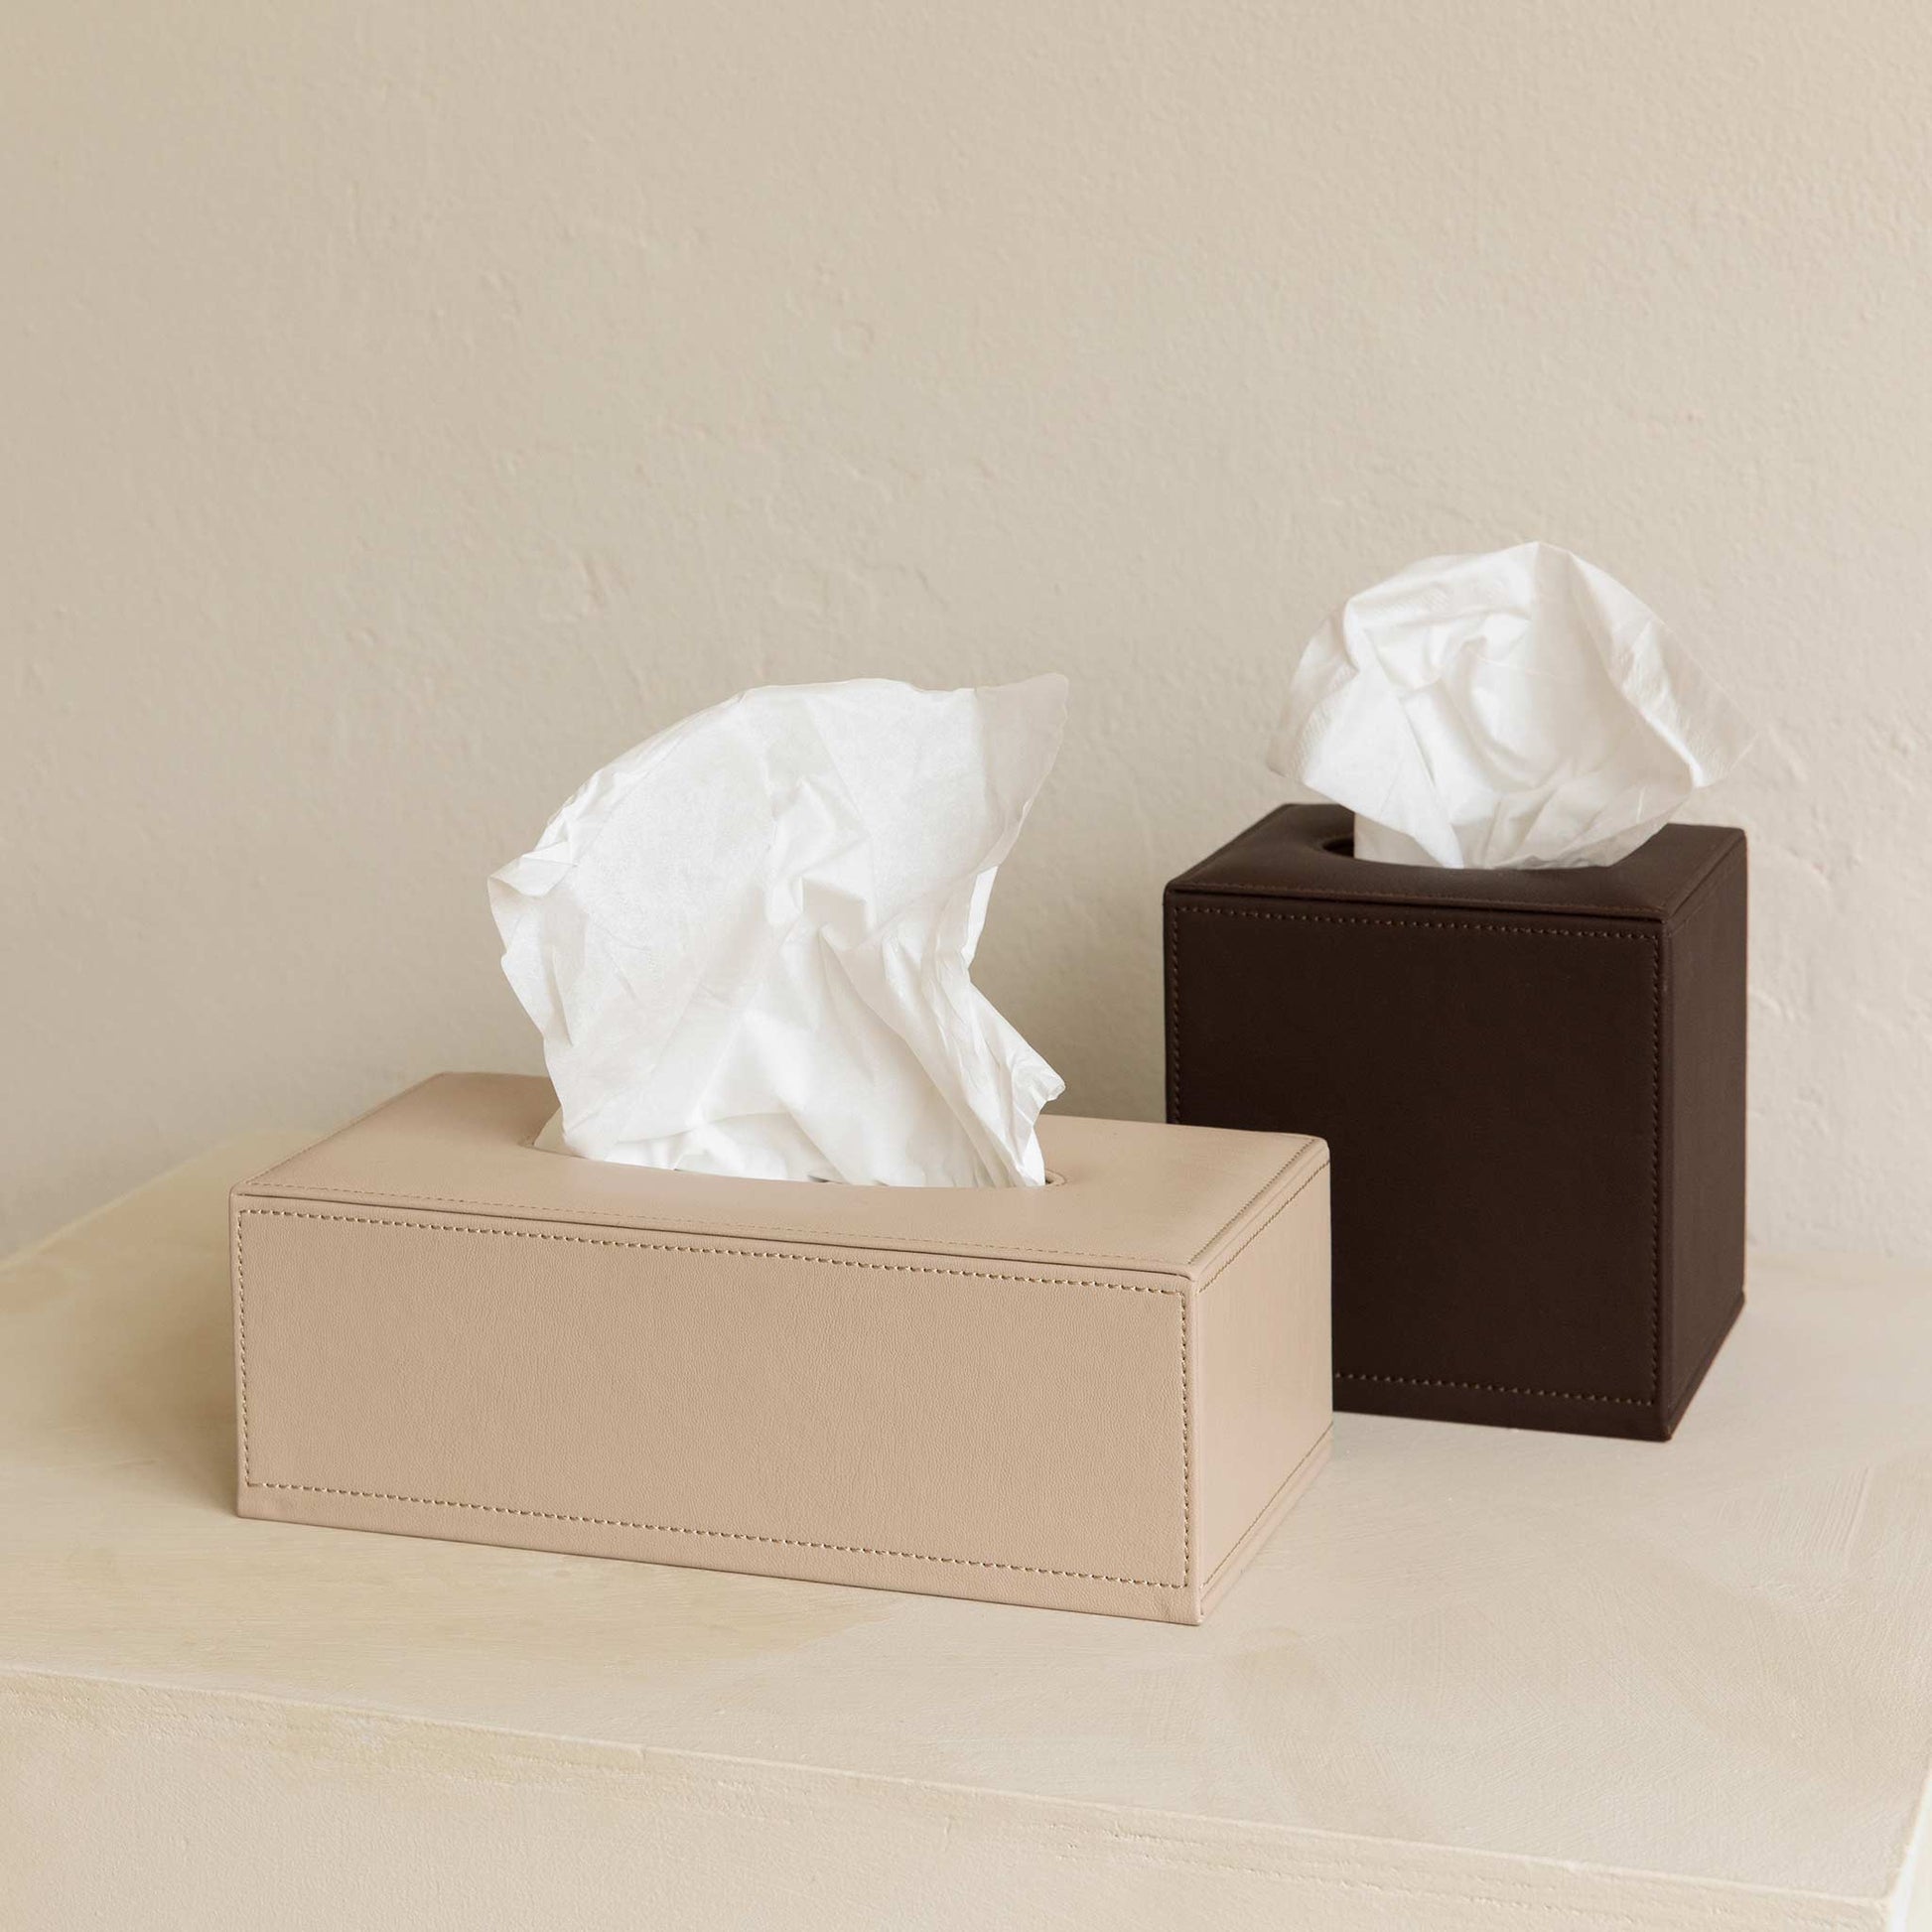 Hotel and office leather tissue box covers